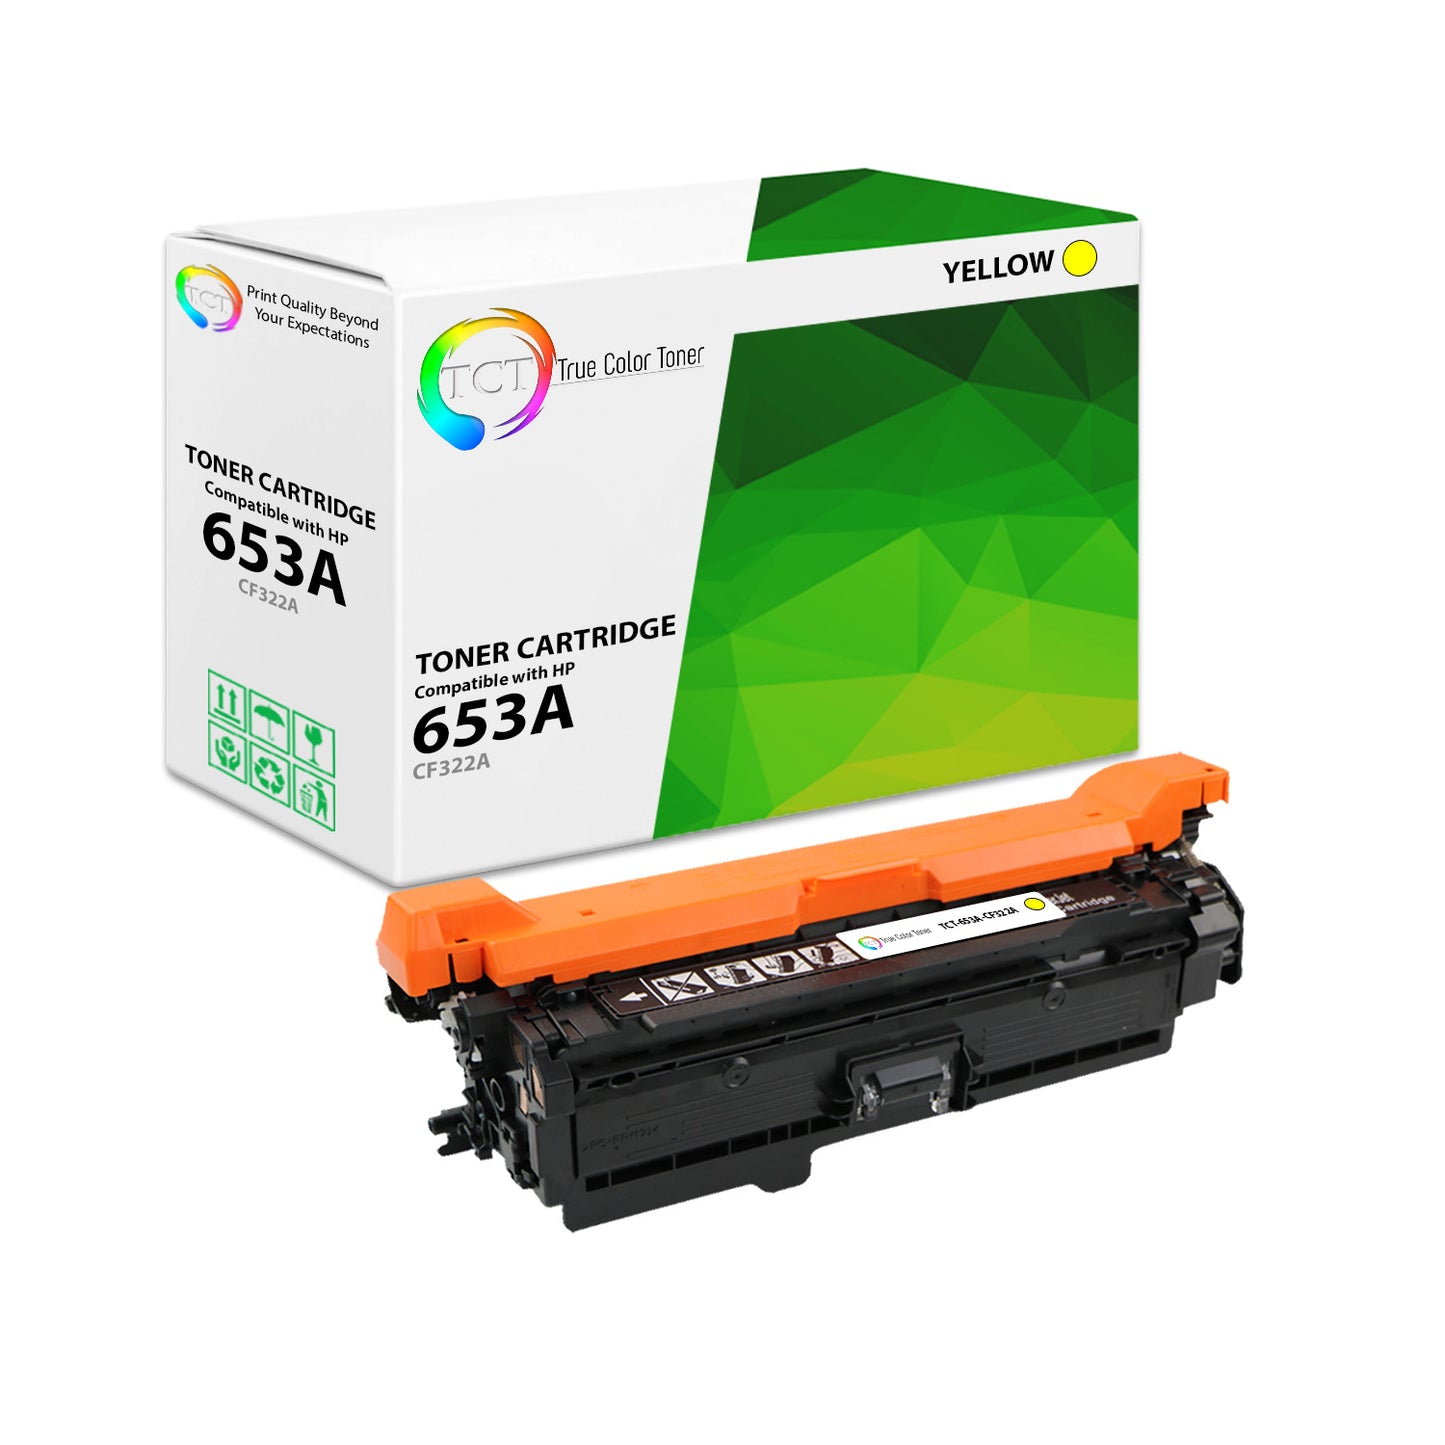 TCT Compatible Toner Cartridge Replacement for the HP 653A Series - 1 Pack Yellow